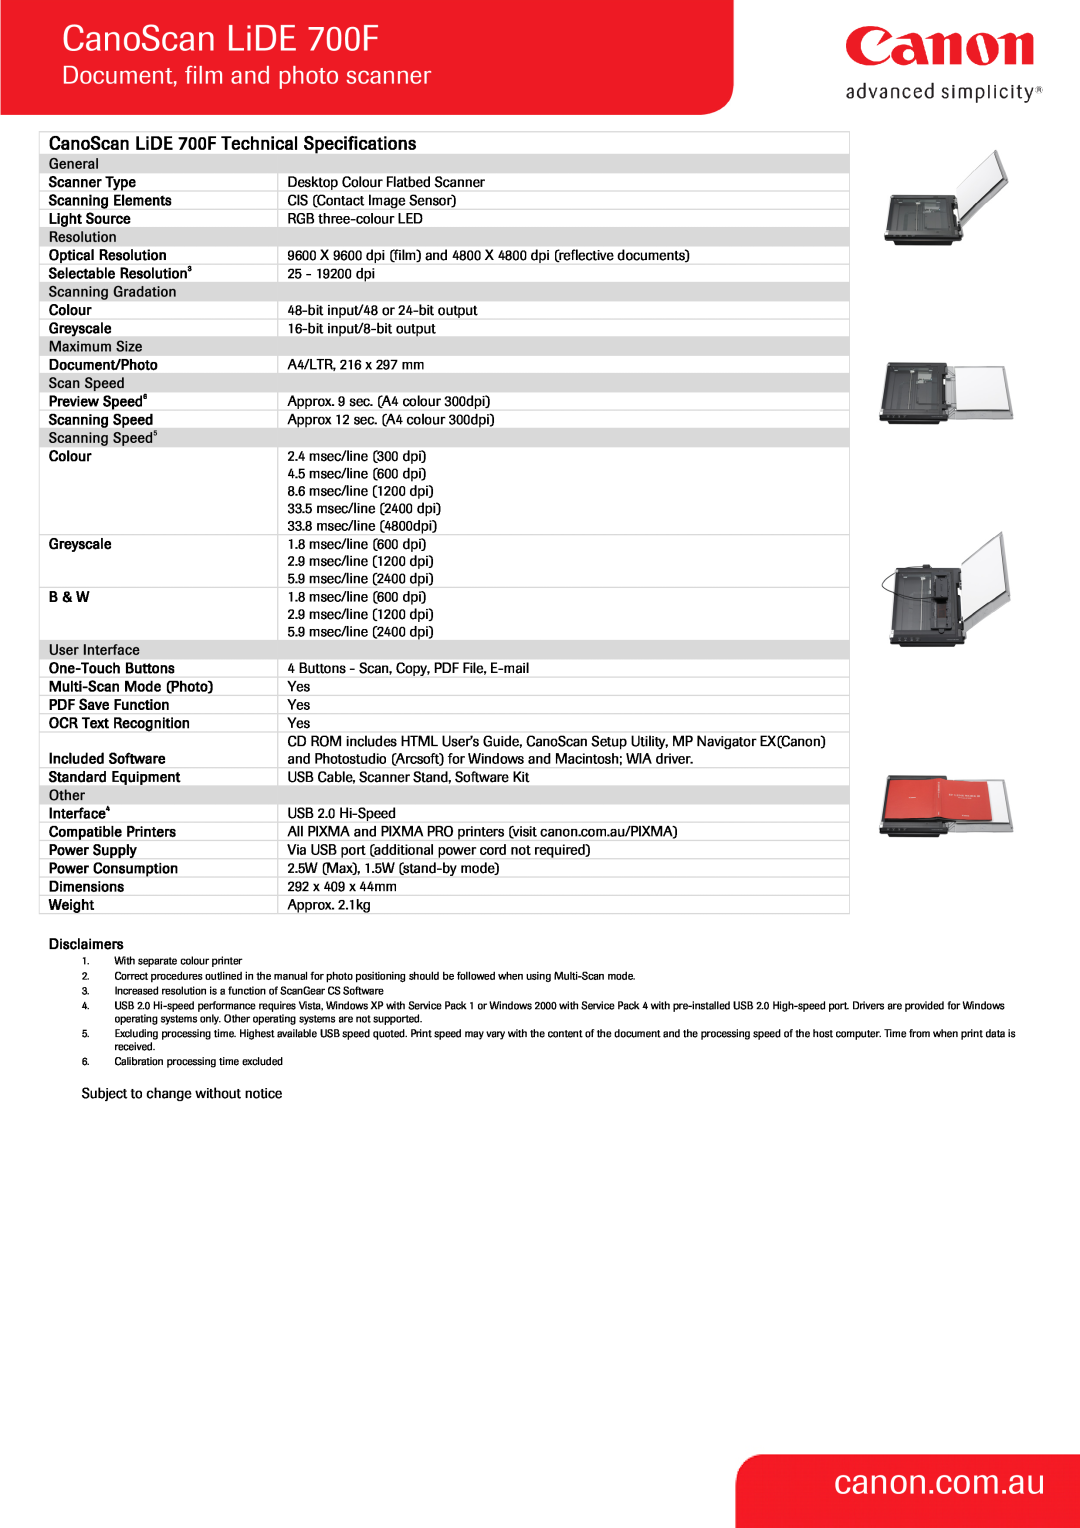 Canon warranty canon.com.au, Document, film and photo scanner, CanoScan LiDE 700F Technical Specifications 